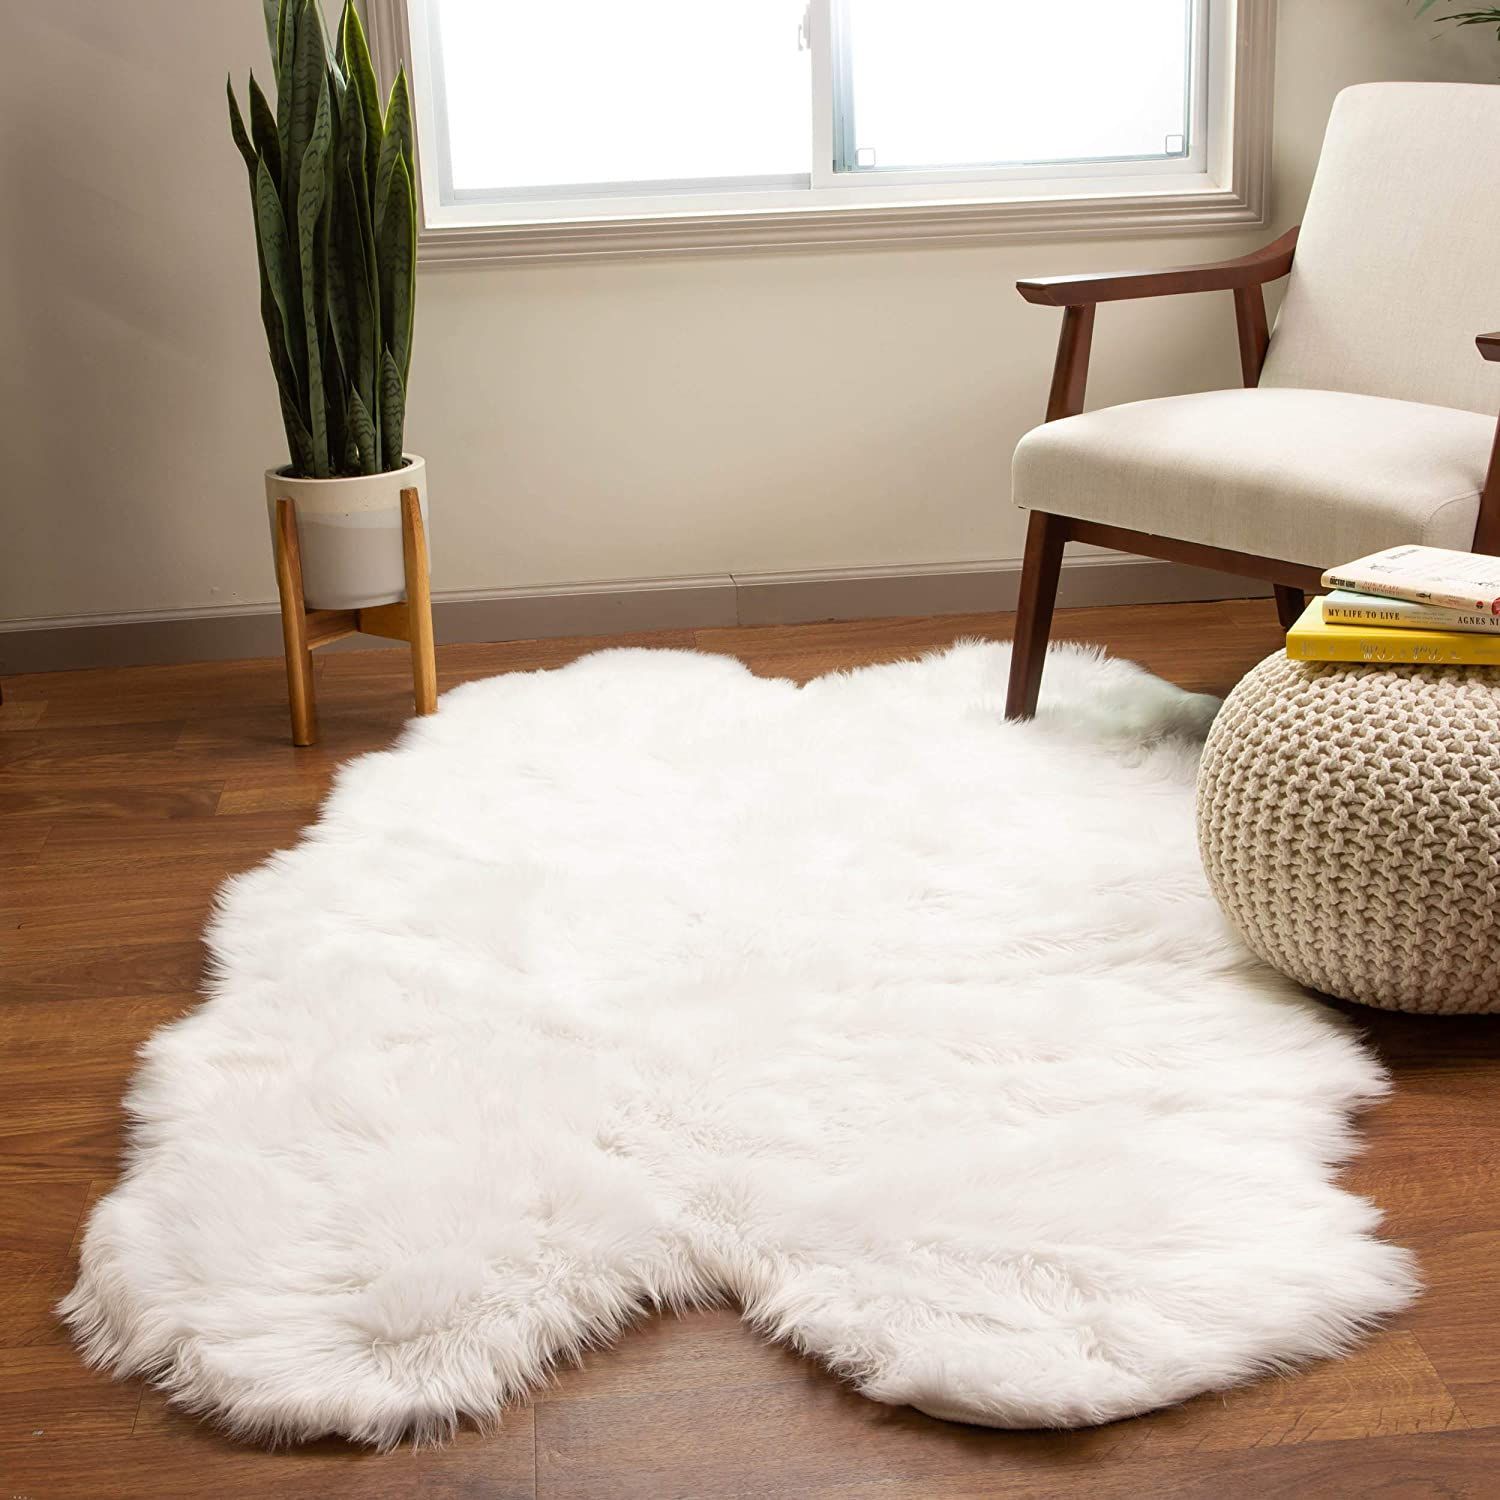 Soft Cosy Shaggy Rugs Fluffy Living Room Area Carpets Home Bedroom Floor Mat 